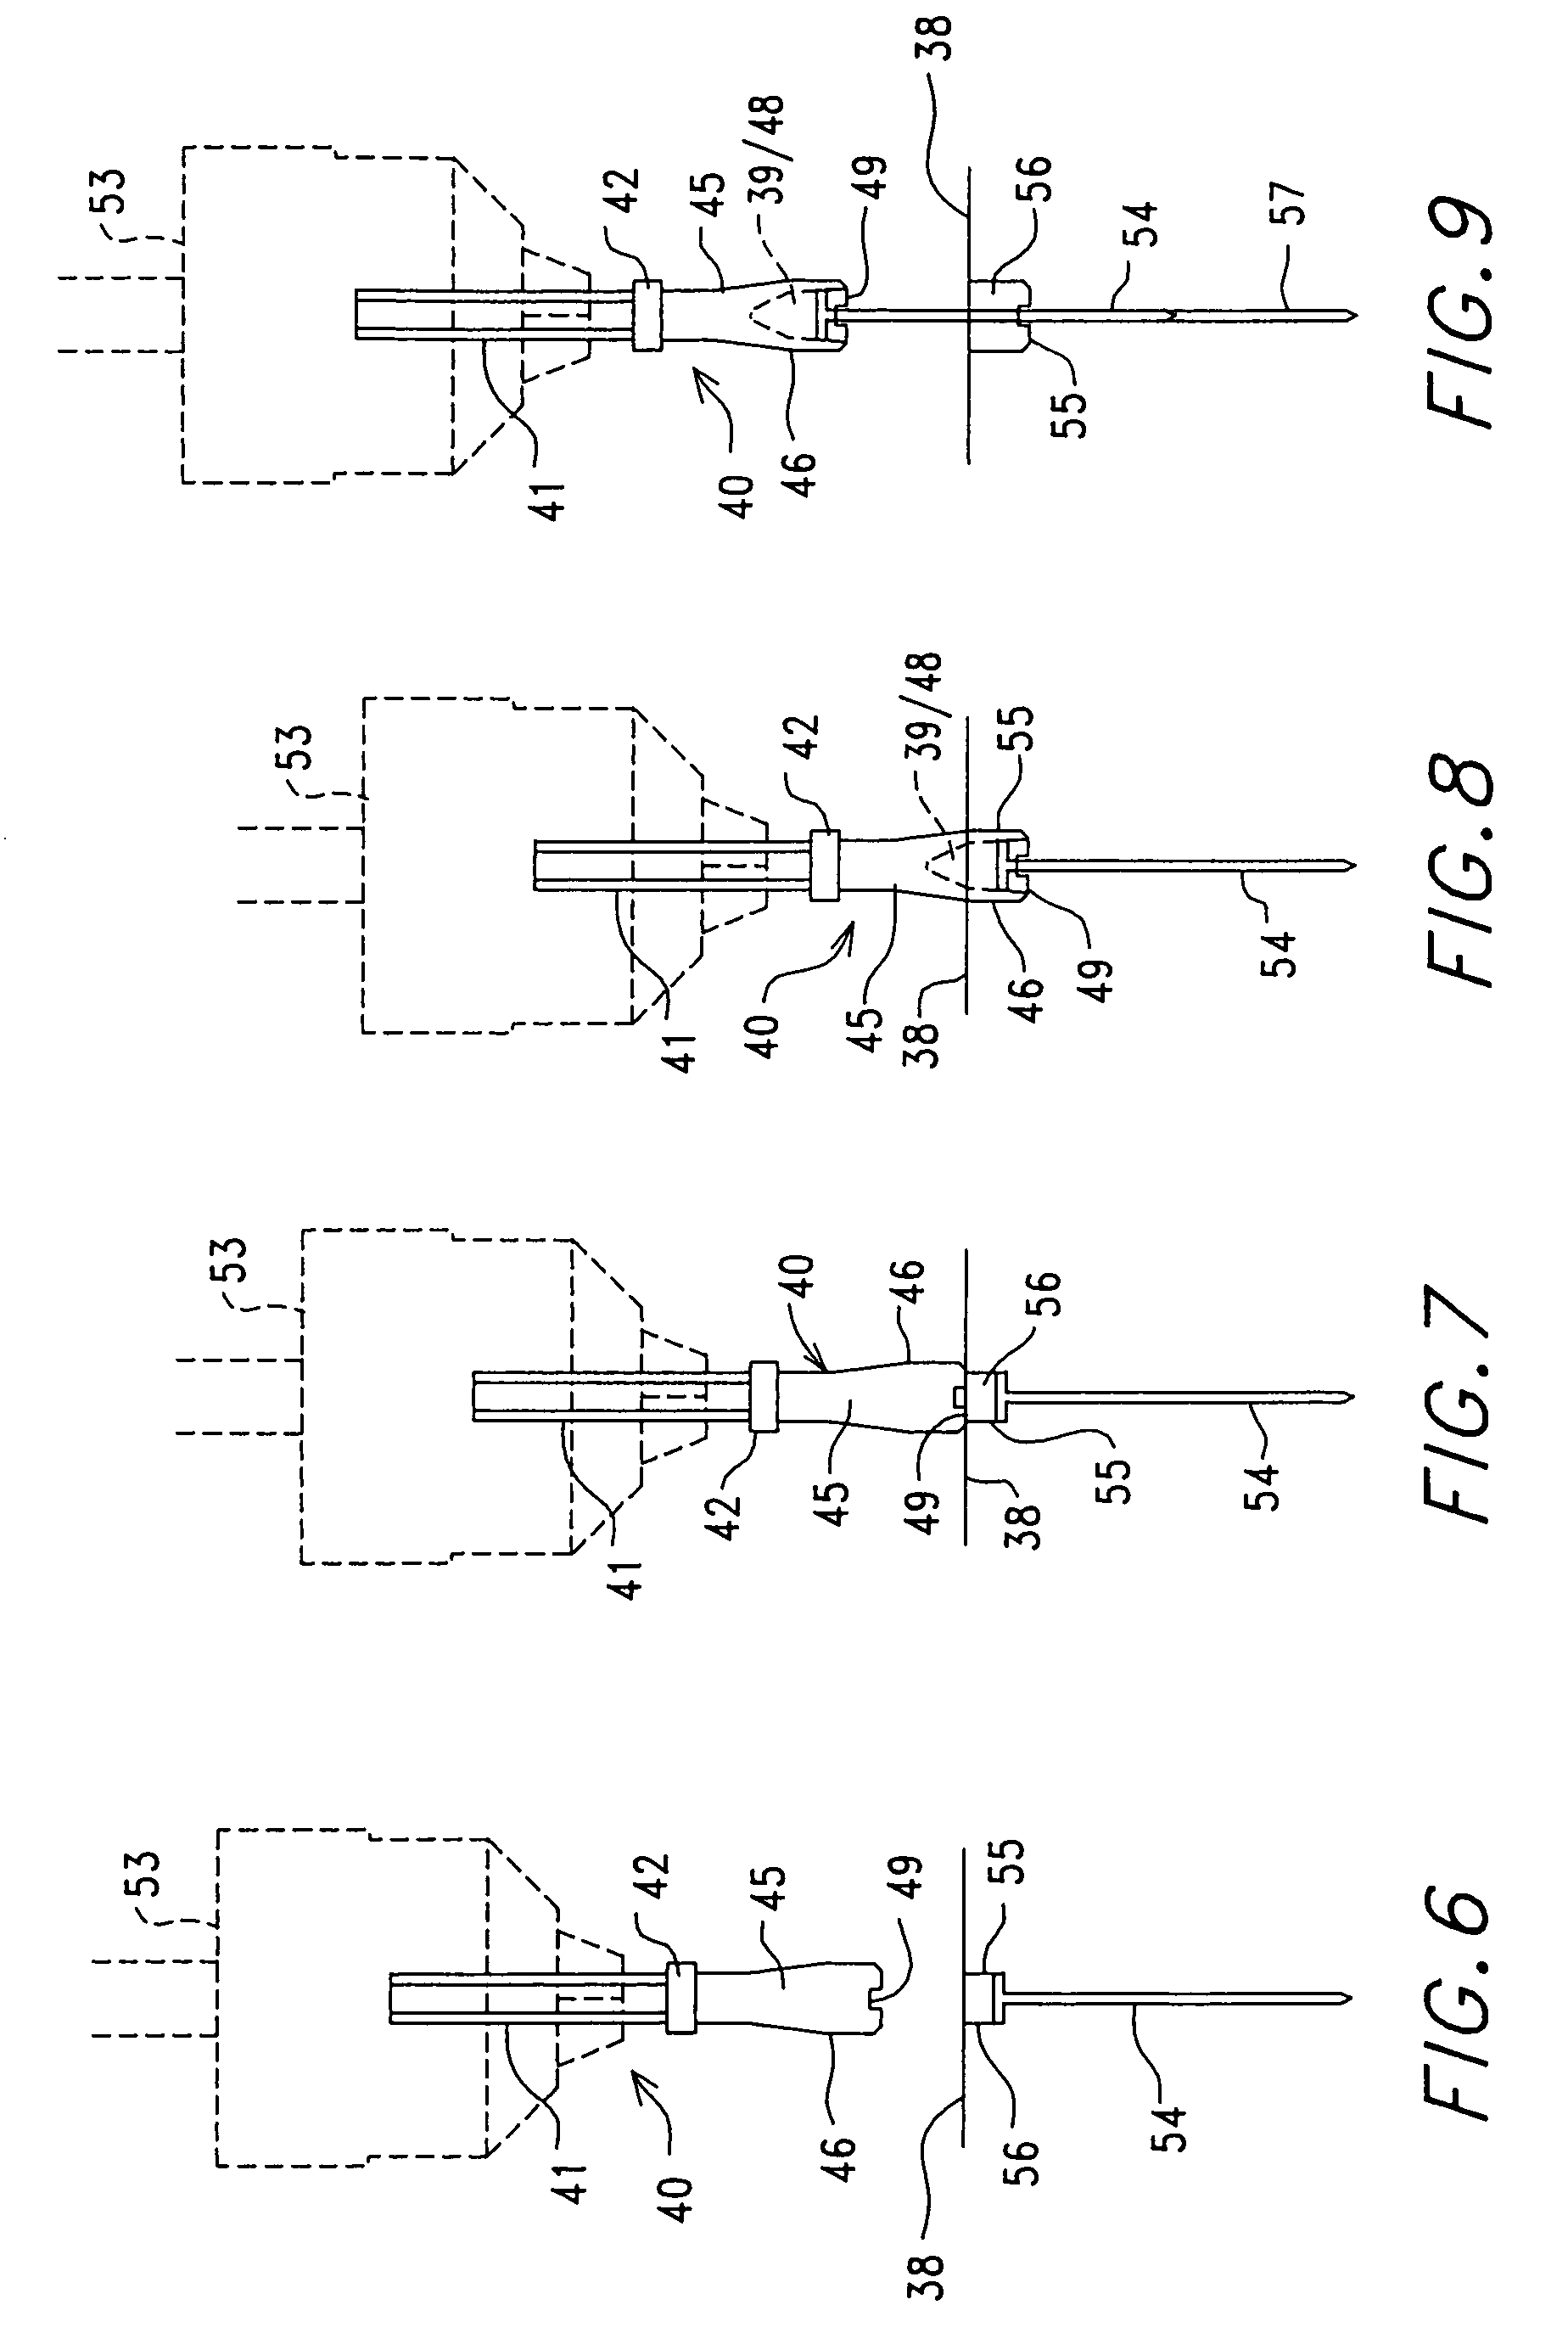 Methods for extracting fasteners from a host material